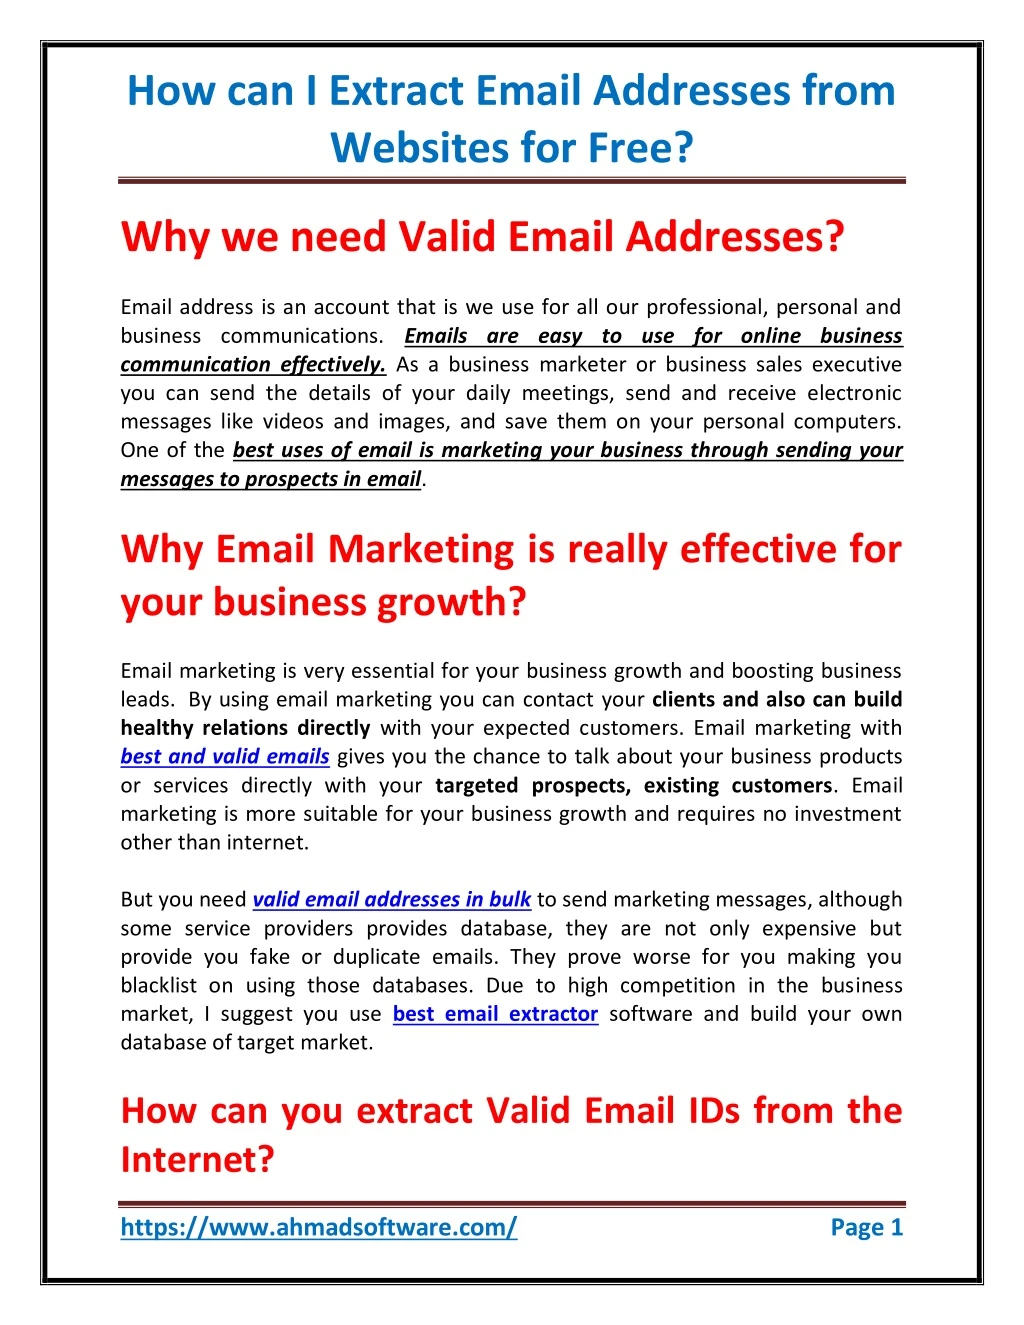 how can i extract email addresses from websites